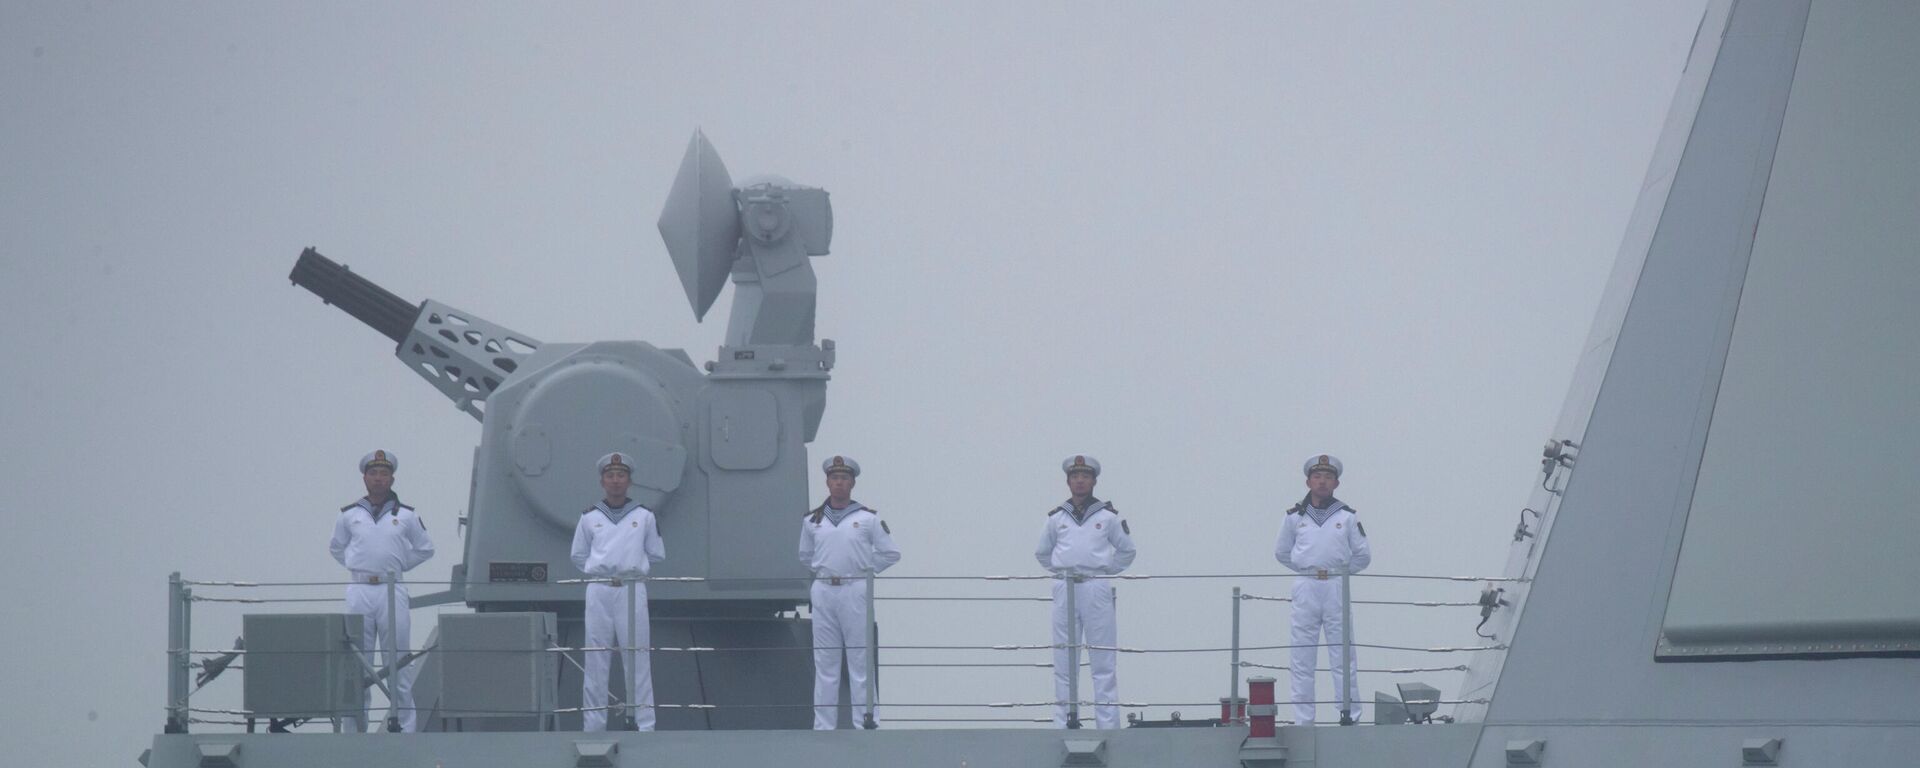 Sailors stand on the deck of the new type 055 guided-missile destroyer Nanchang of the Chinese People's Liberation Army (PLA) Navy as it participates in a naval parade to commemorate the 70th anniversary of the founding of China's PLA Navy in the sea near Qingdao in eastern China's Shandong province, Tuesday, April 23, 2019 - Sputnik International, 1920, 21.04.2023